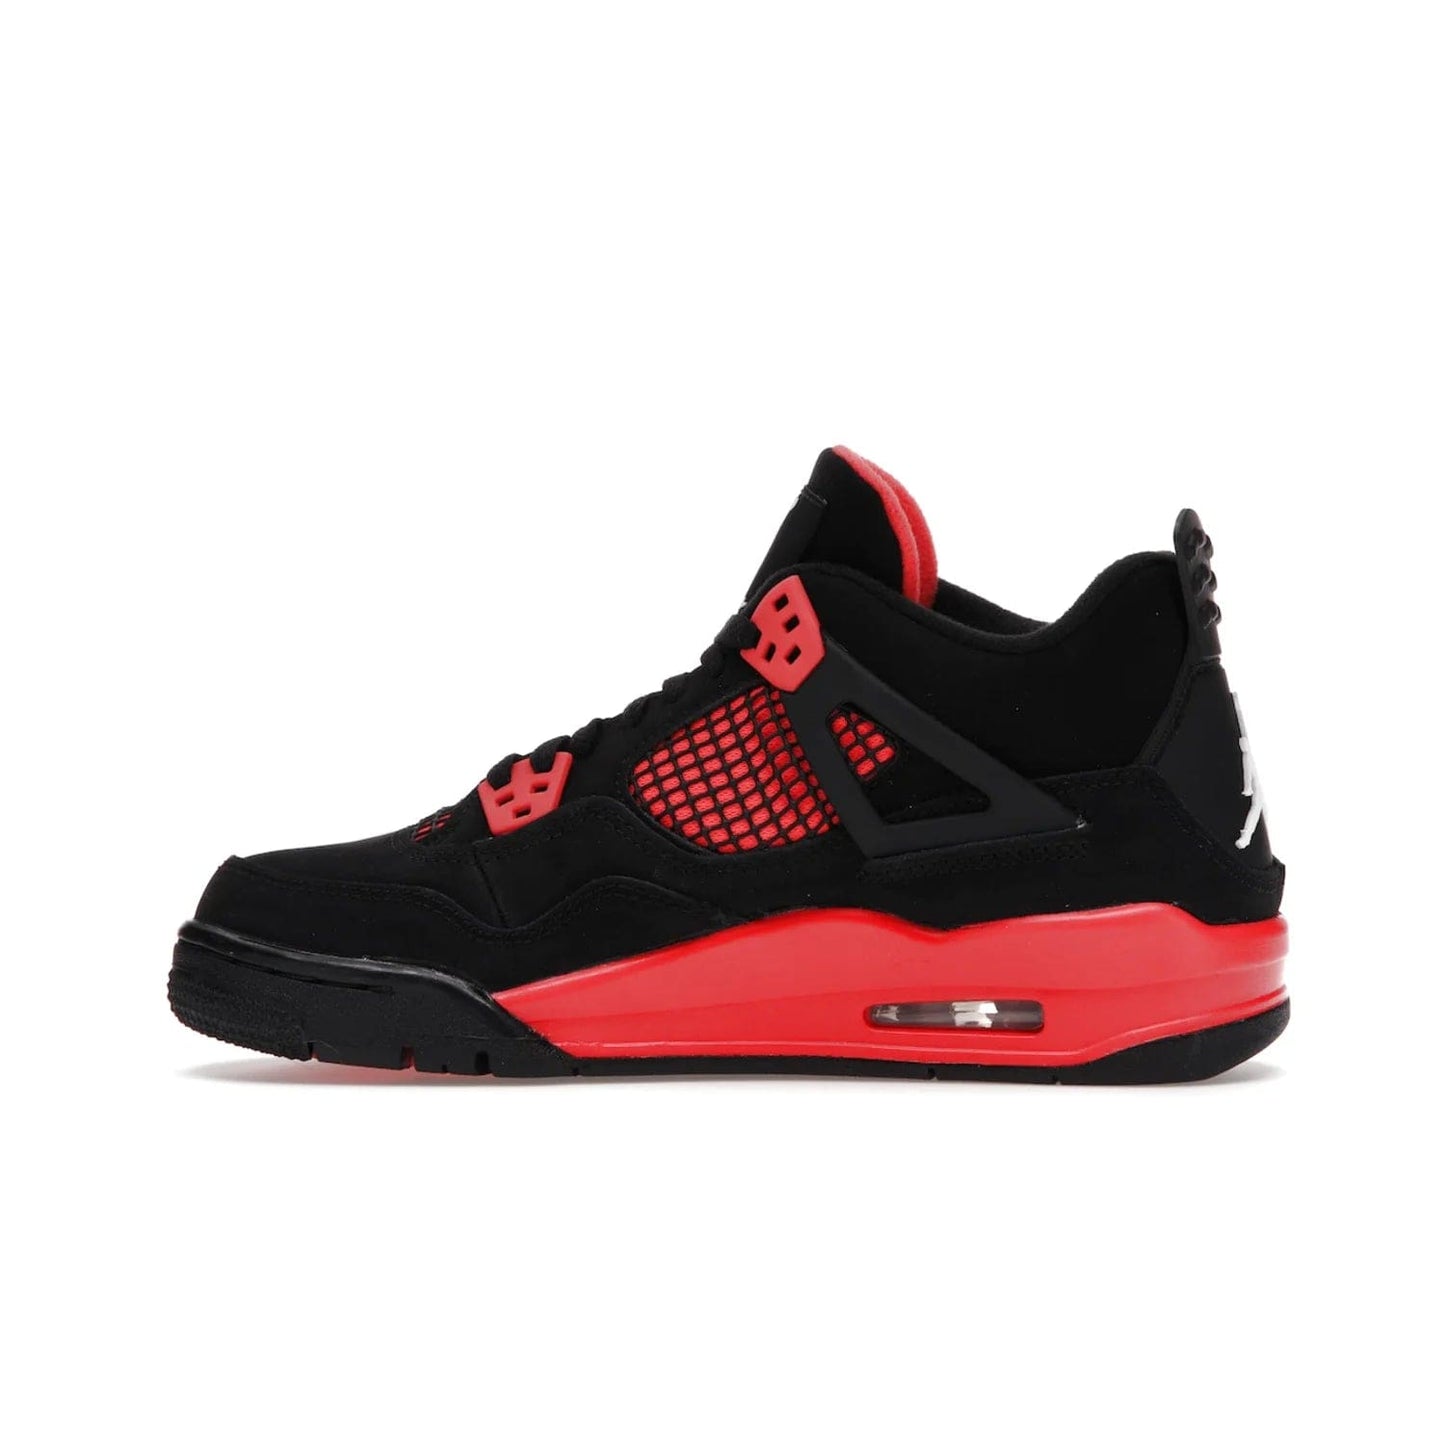 Jordan 4 Retro Red Thunder (GS) - Image 20 - Only at www.BallersClubKickz.com - The Air Jordan 4 Retro Red Thunder GS features a stylish black and crimson upper with a Jumpman logo. Athletic midsole with Air bubbles for cushioning and black rubber outsole with iconic motif complete this classic sneaker.